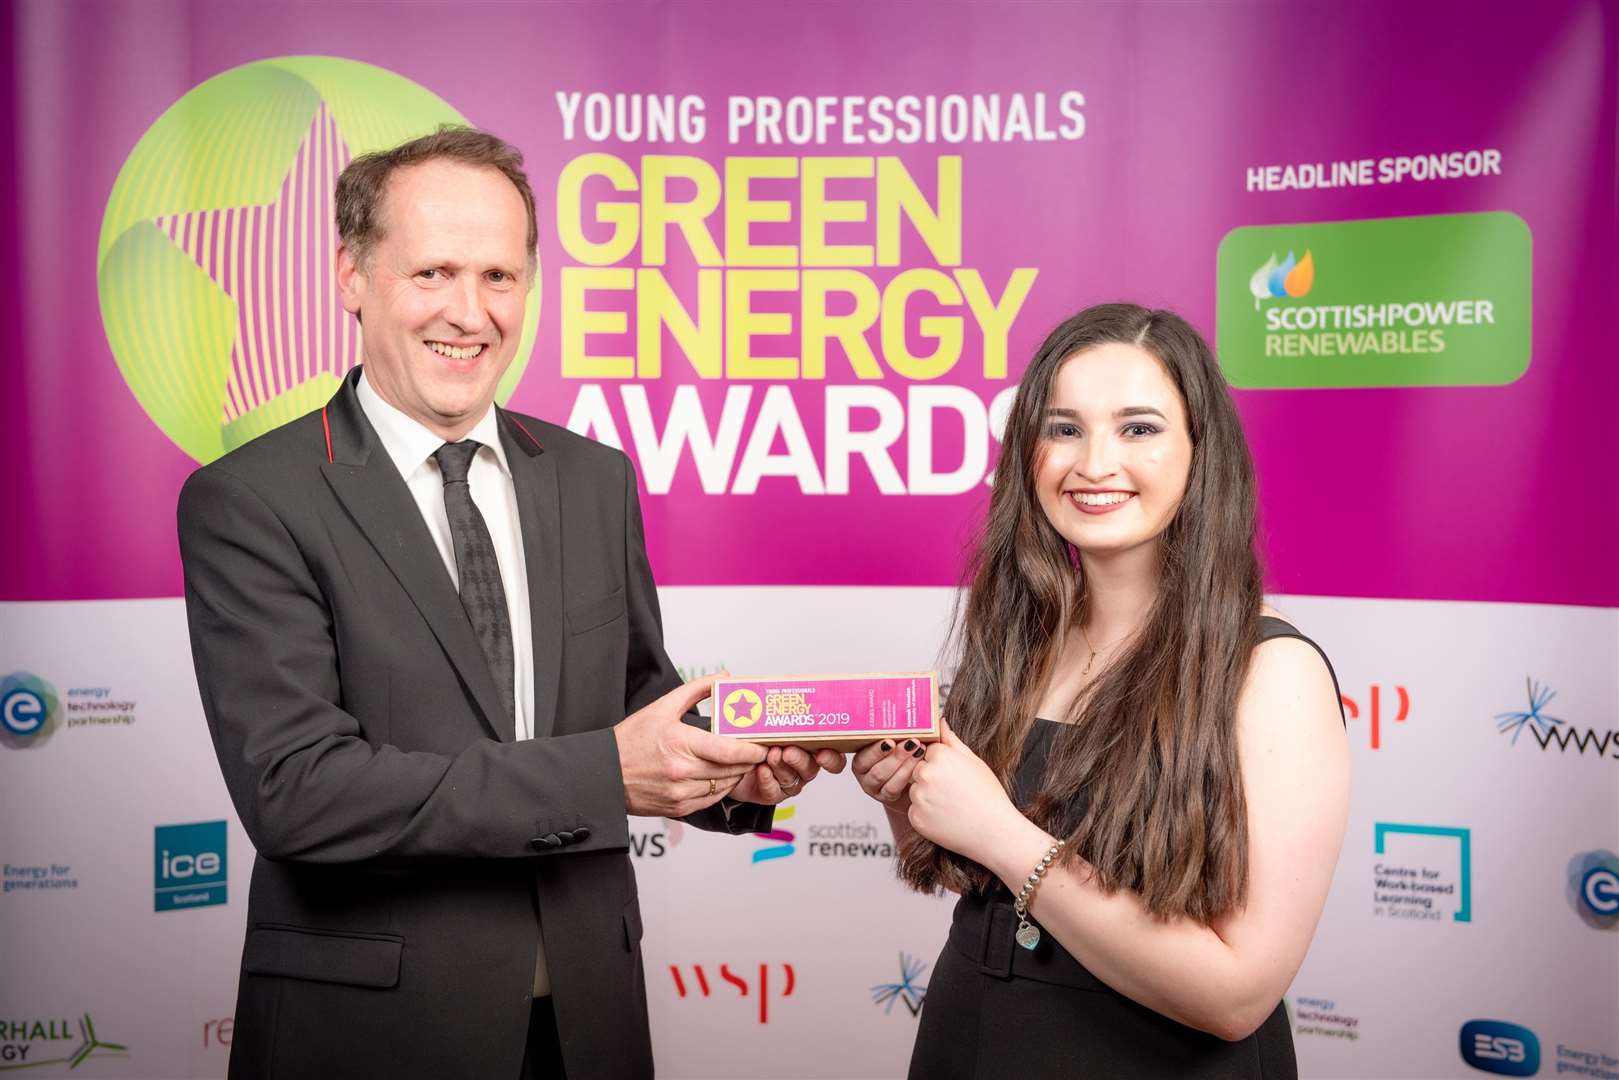 Hannah Houston received the judges award from Keith Anderson of ScottishPower Renewables.